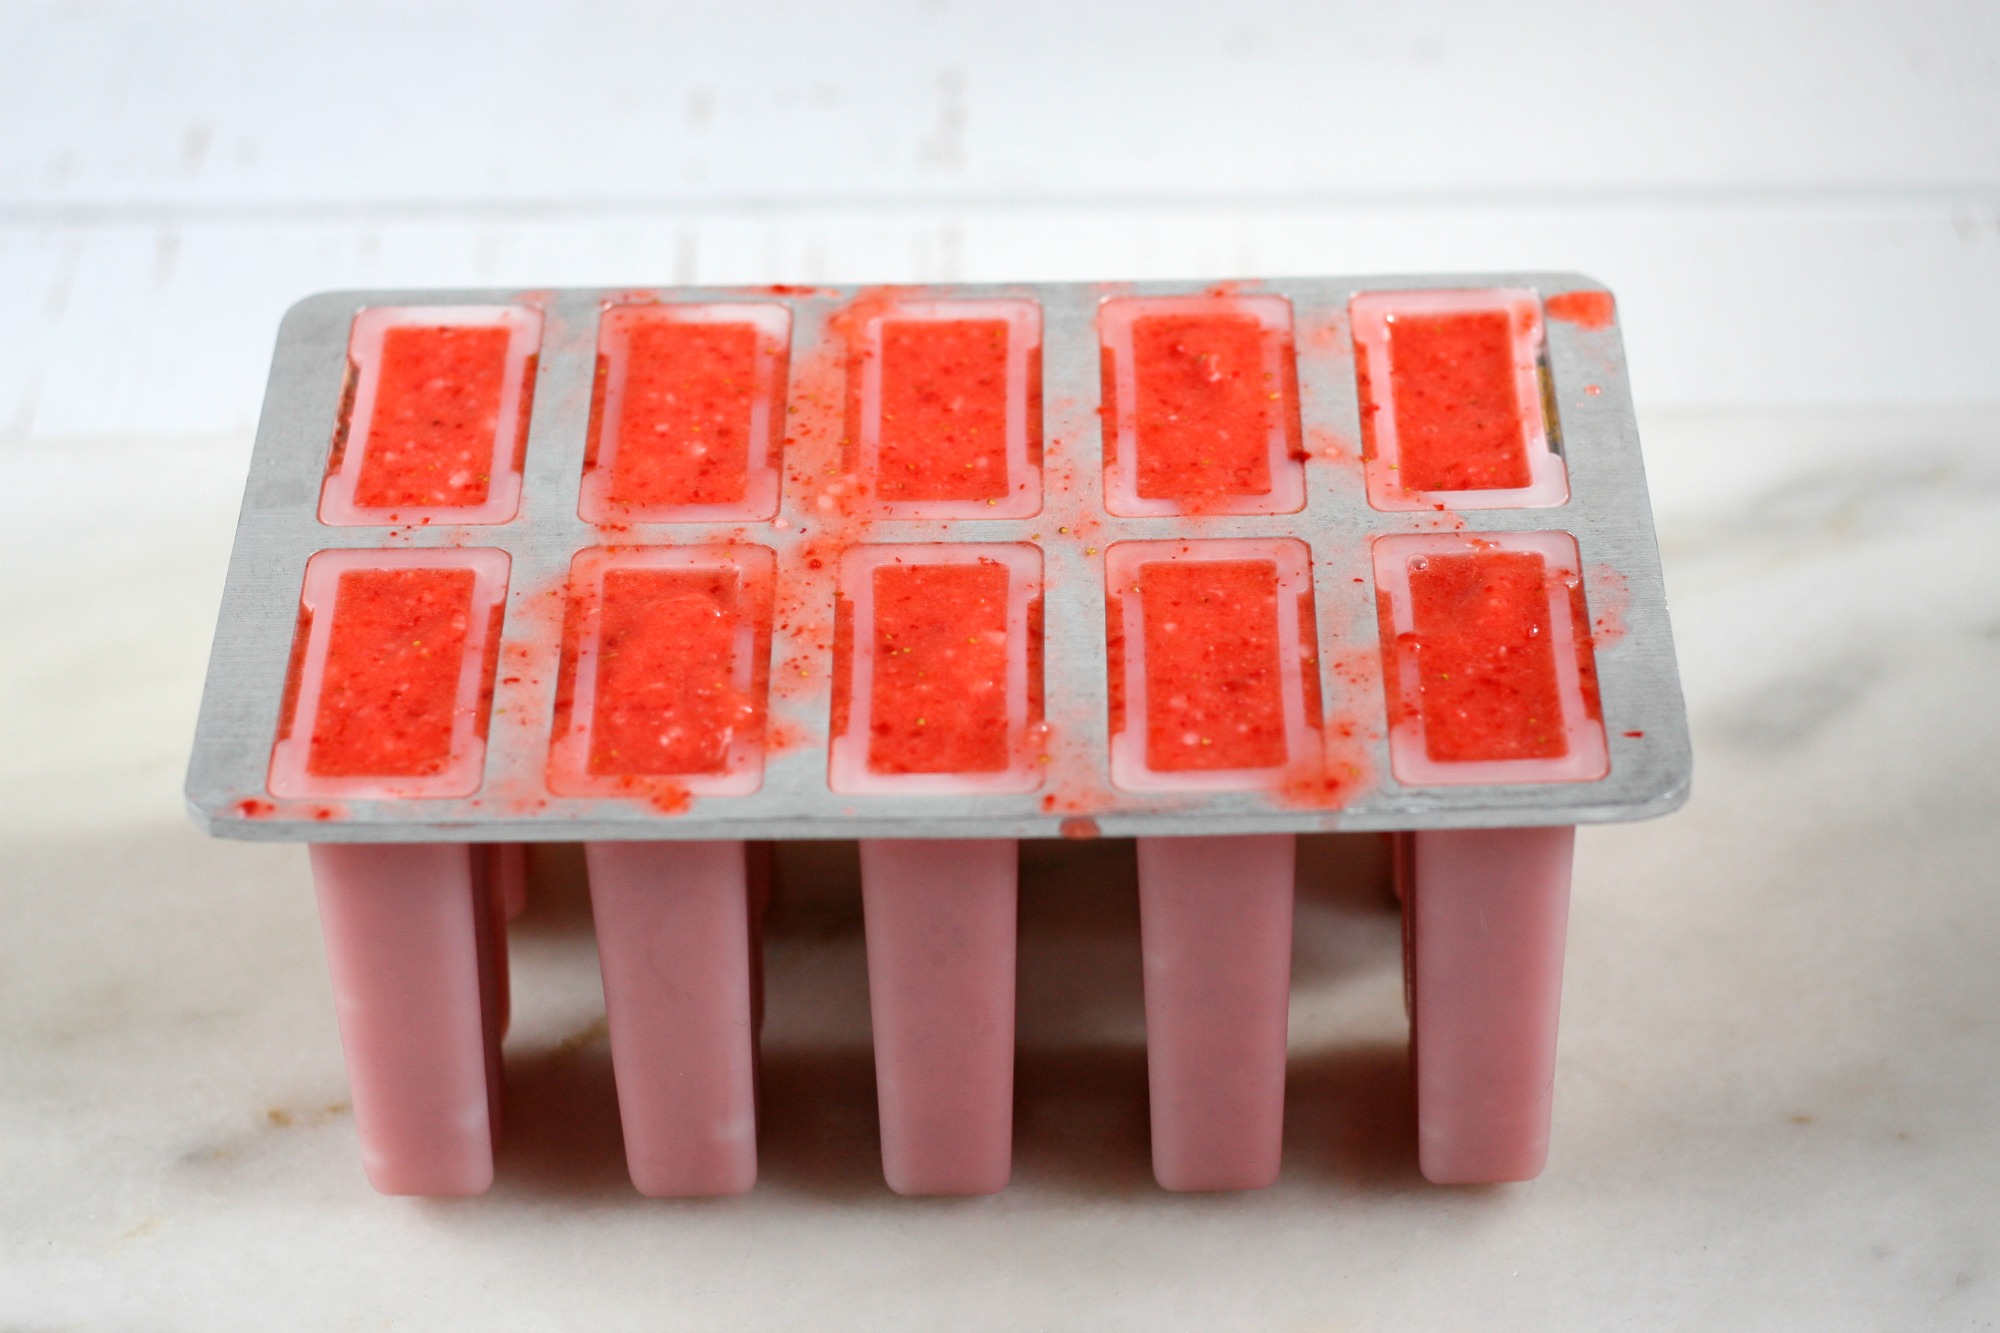 strawberry puree poured into a popsicle mold.